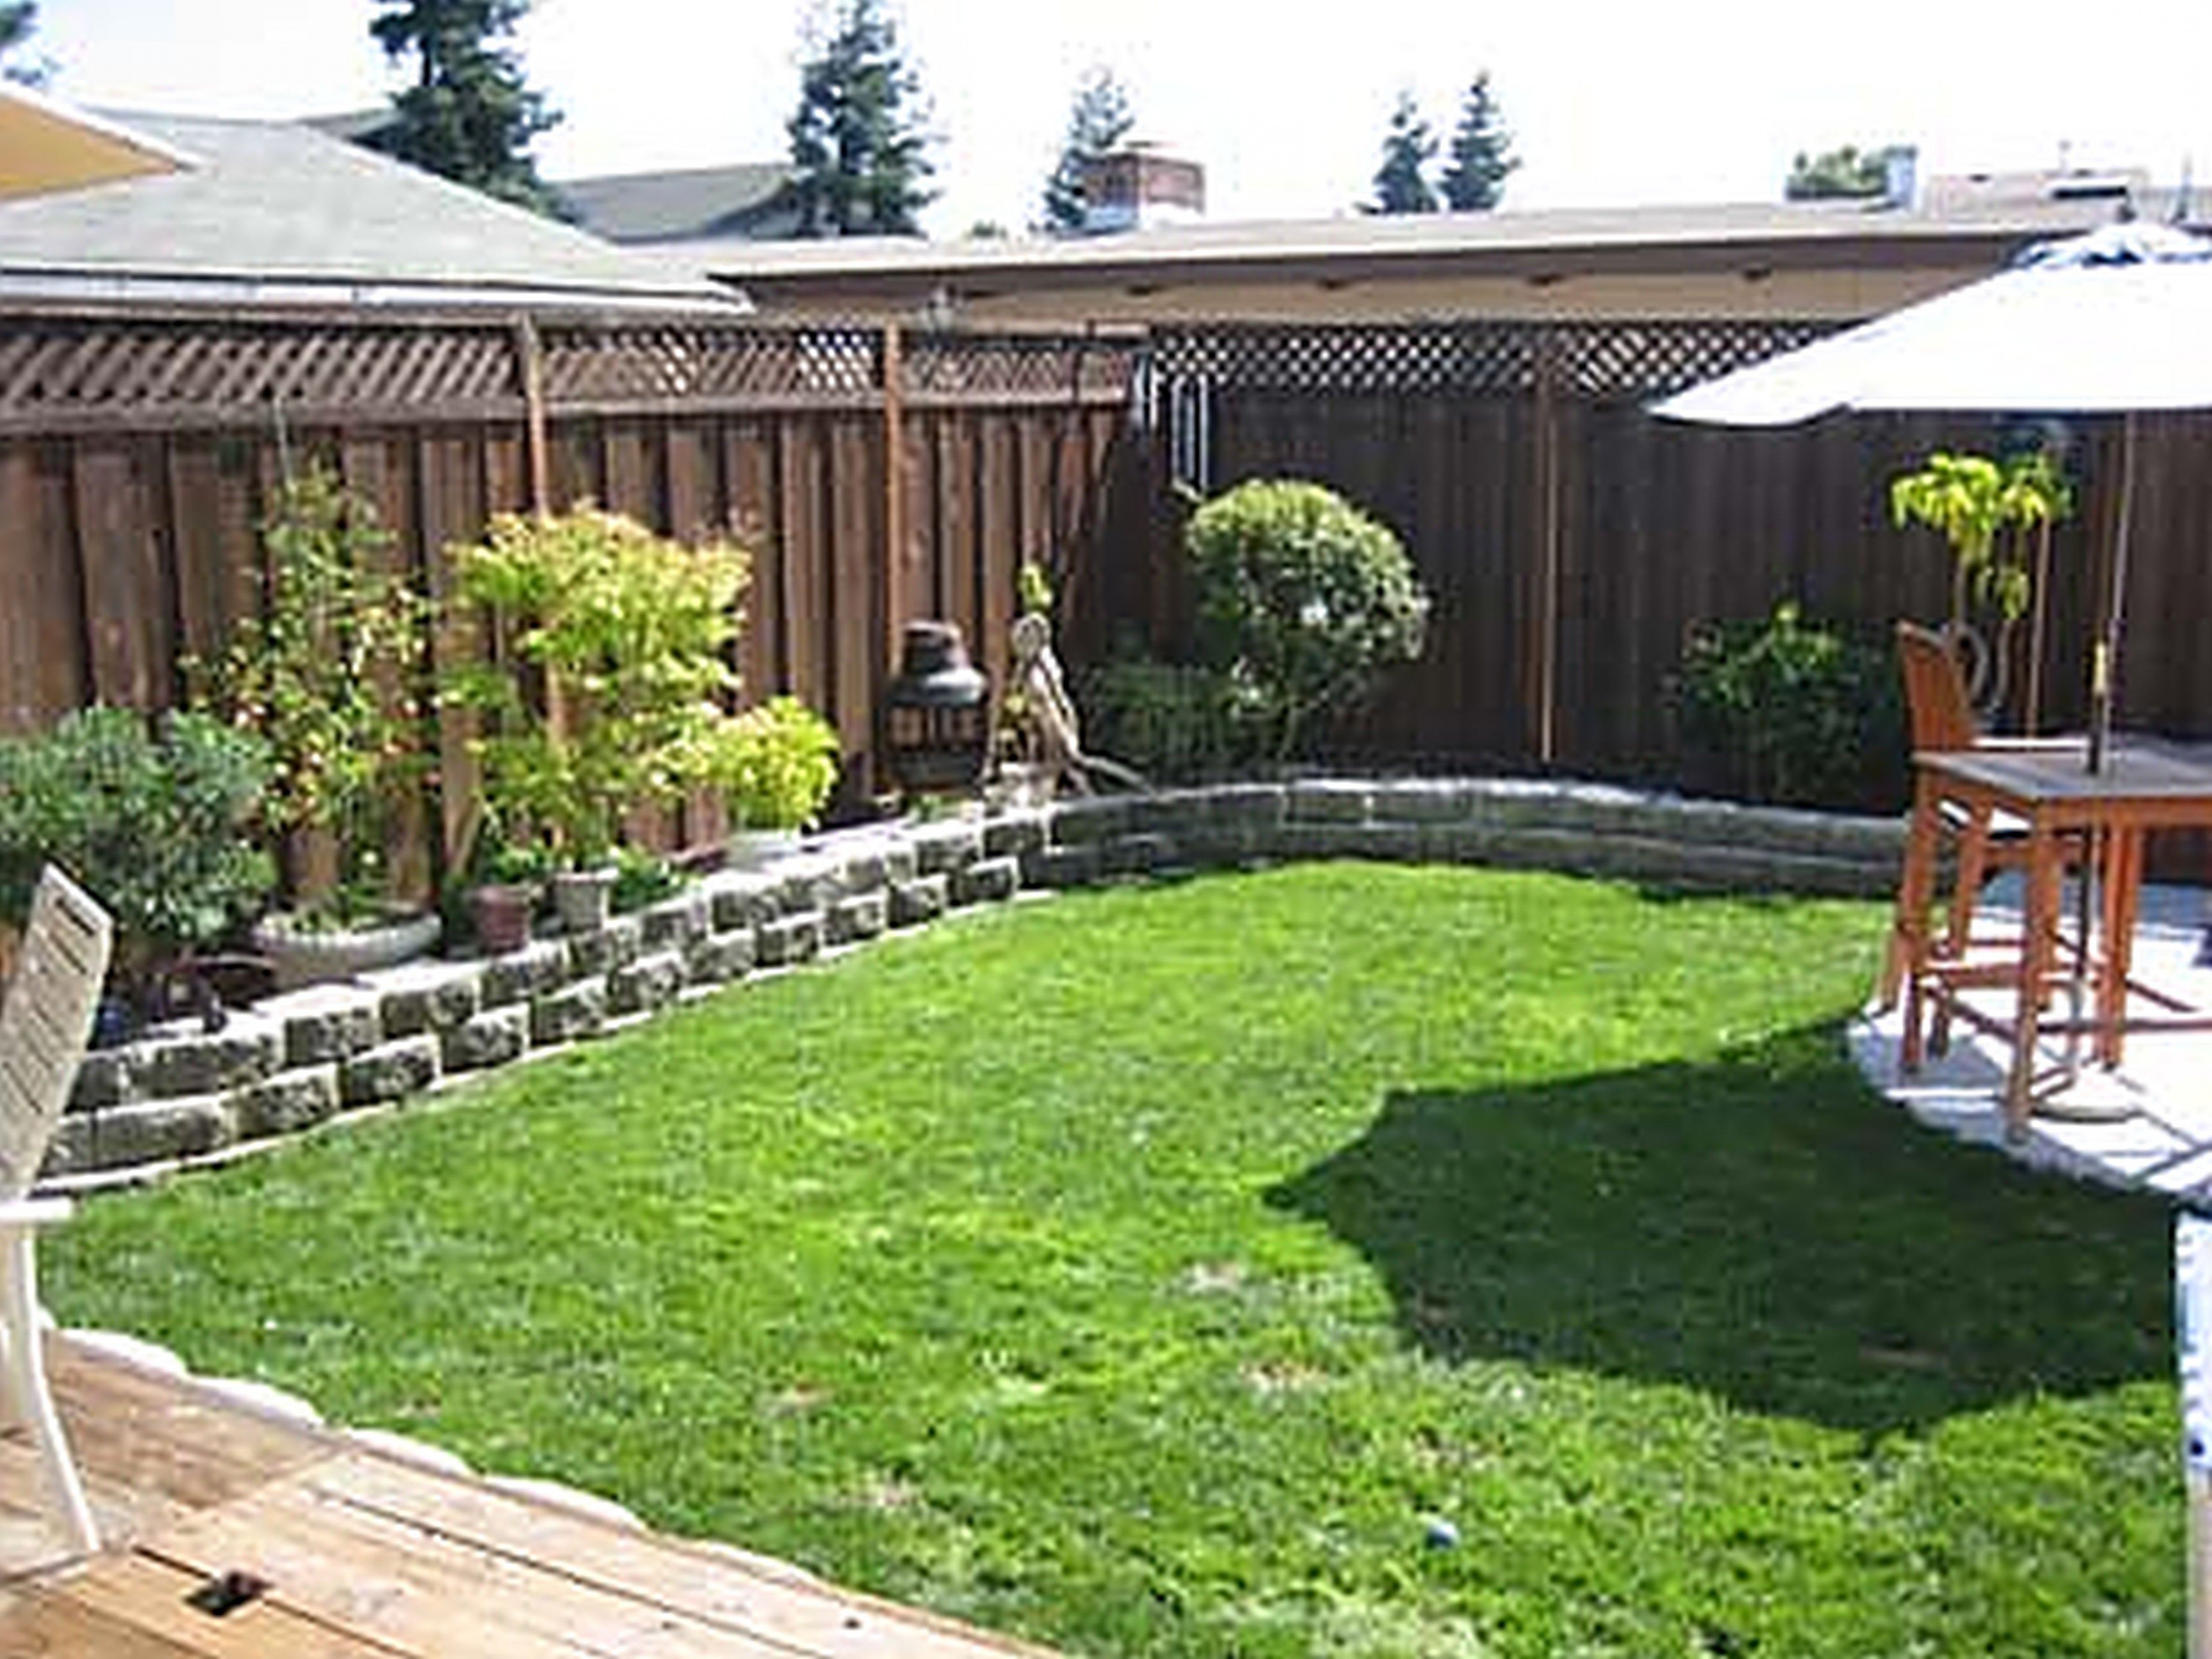 backyard landscaping yard designs budget landscape patio simple backyards garden front cheap awesome layout outdoor makeover diy suburban inexpensive yards